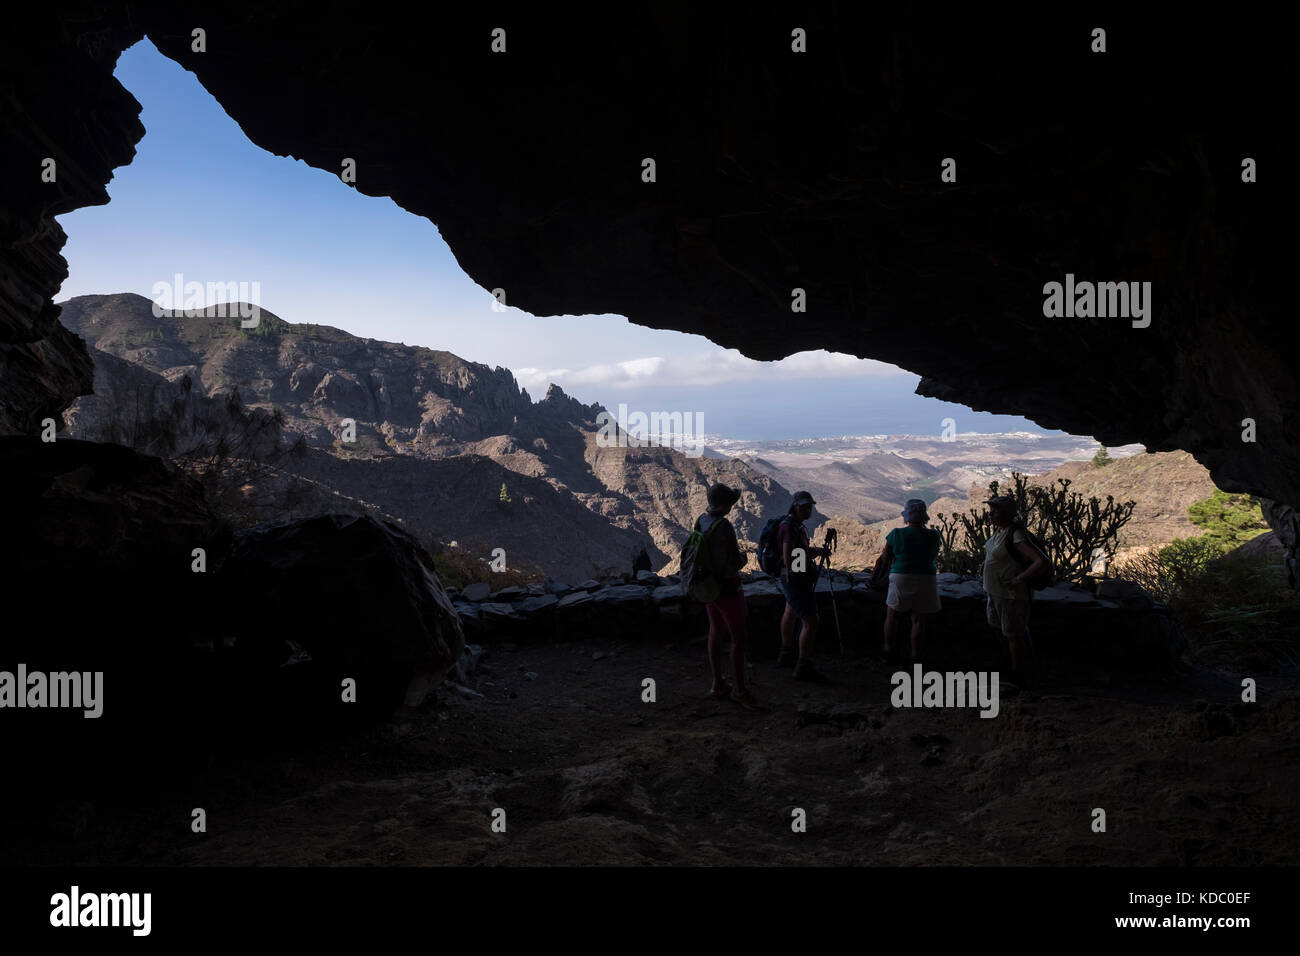 Walkers in a cave overlooking the Barranco de Los Fuentes down to the coast at Adeje, Tenerife, Canary Islands, Spain Stock Photo